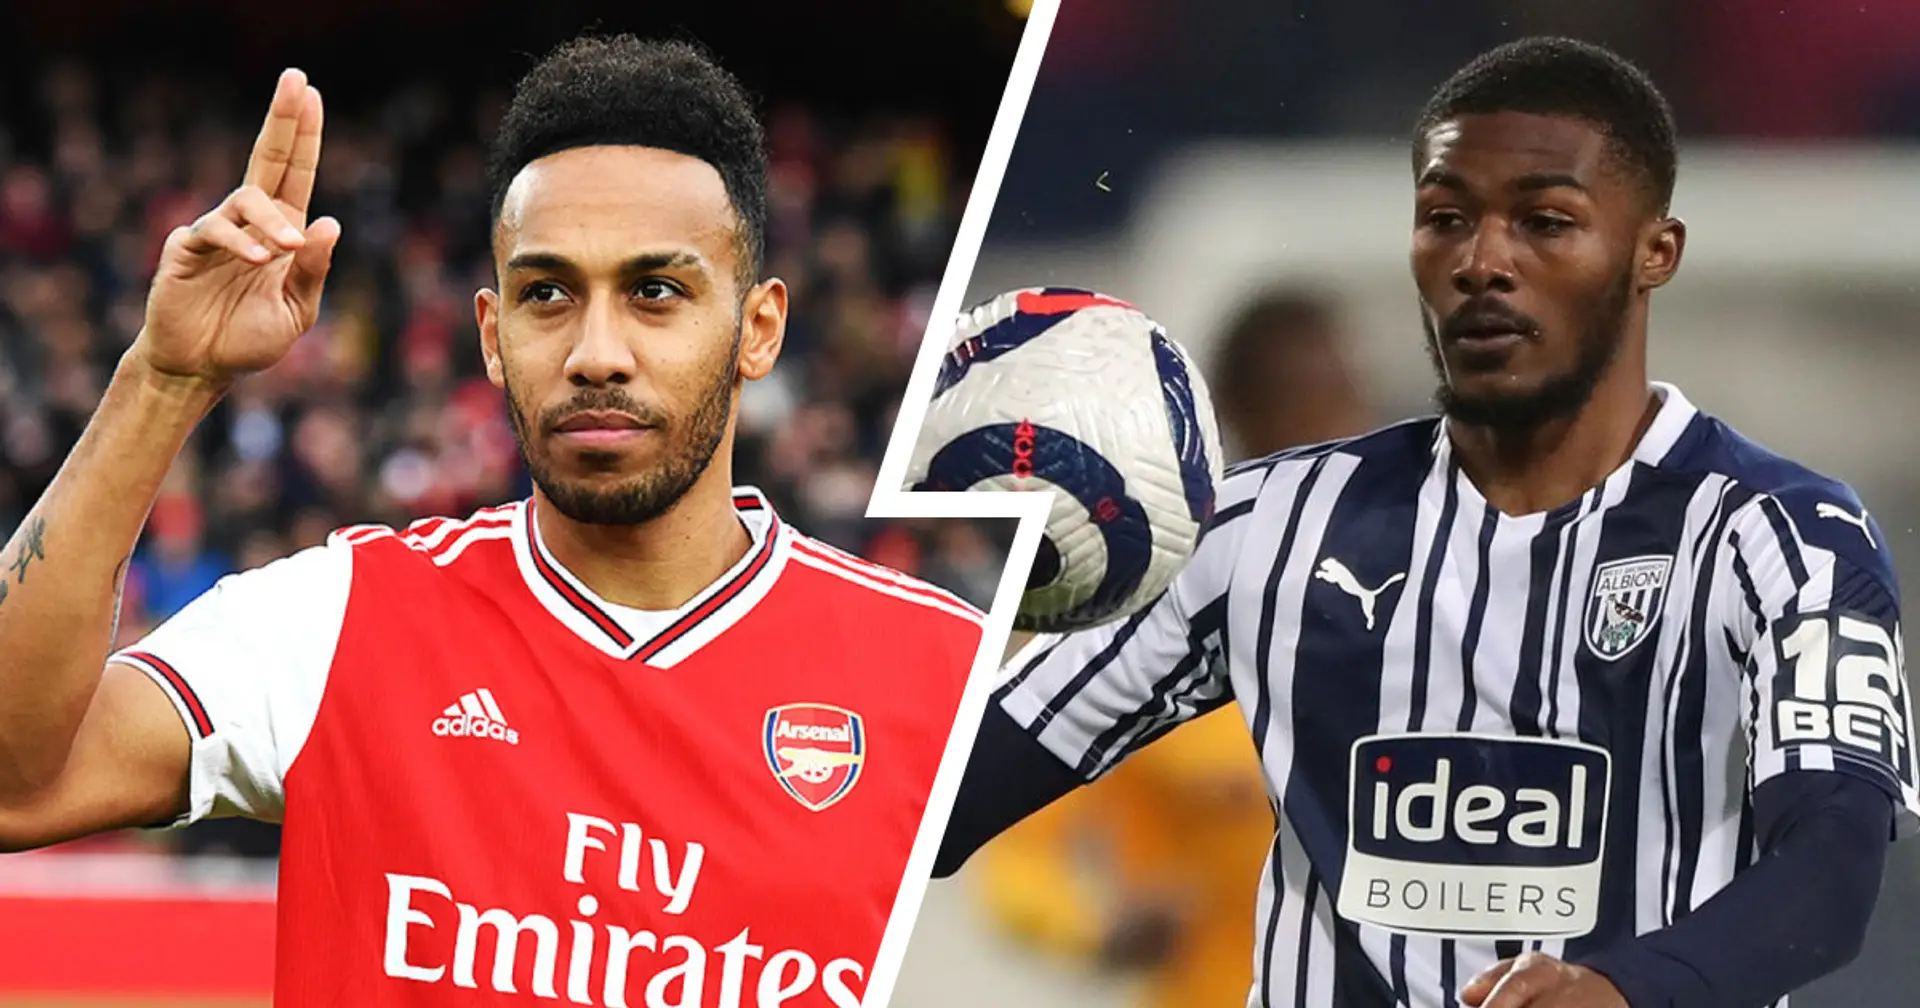 Injuries, suspensions & manager's comments ahead of Arsenal vs West Brom clash